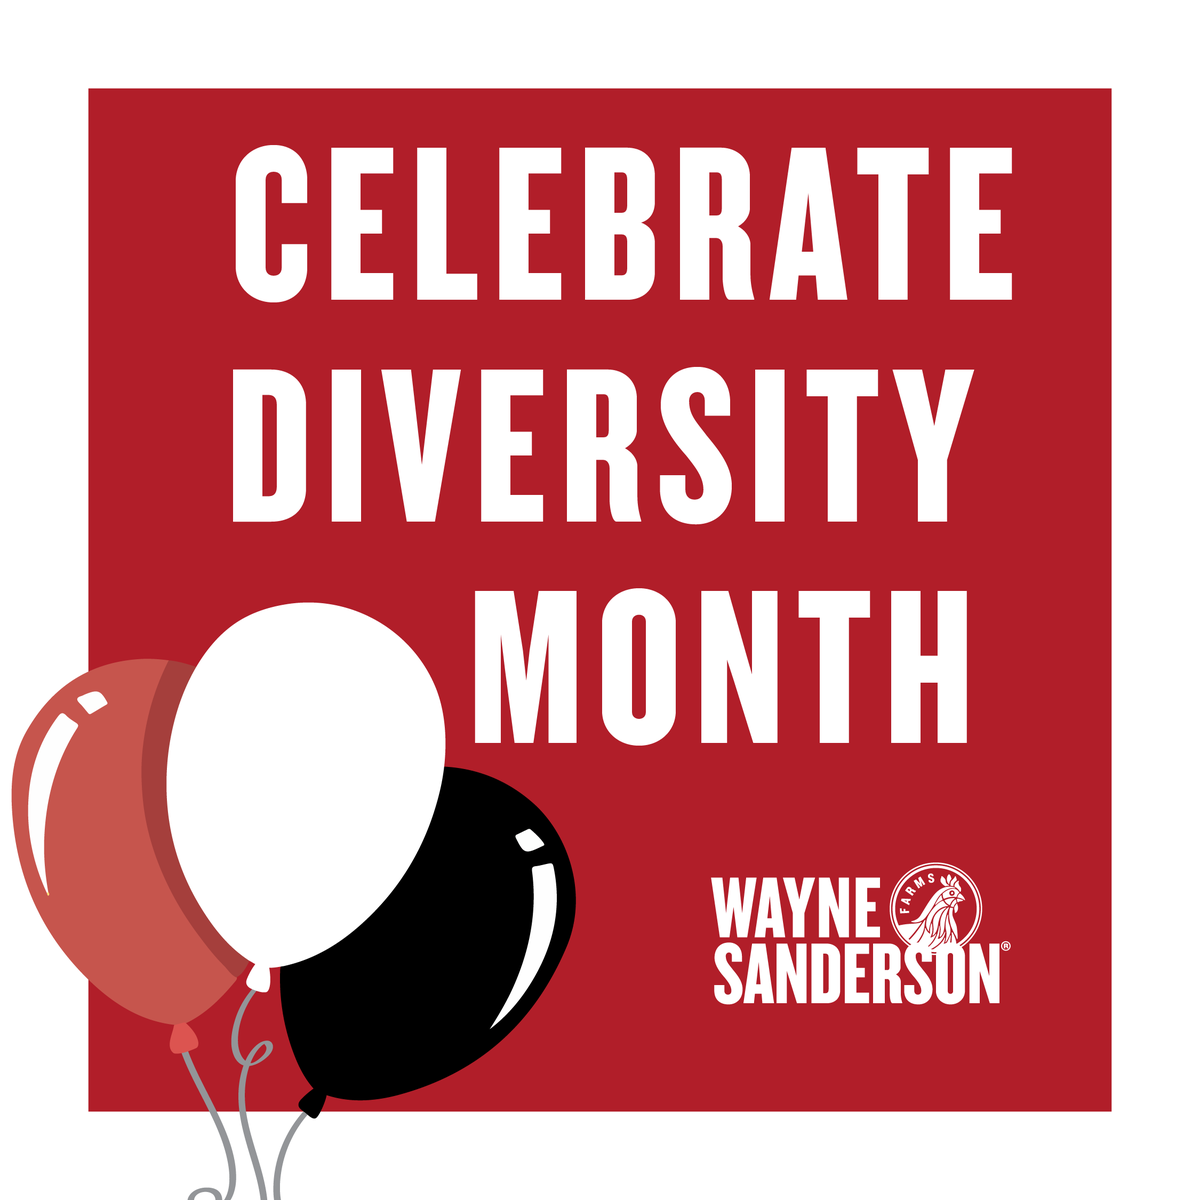 During #CelebrateDiversityMonth in April, Wayne-Sanderson Farms honors and embraces the diverse perspectives and backgrounds of our team which help us to foster innovation and create a stronger, more inclusive workplace! #MakingChickenAmazing